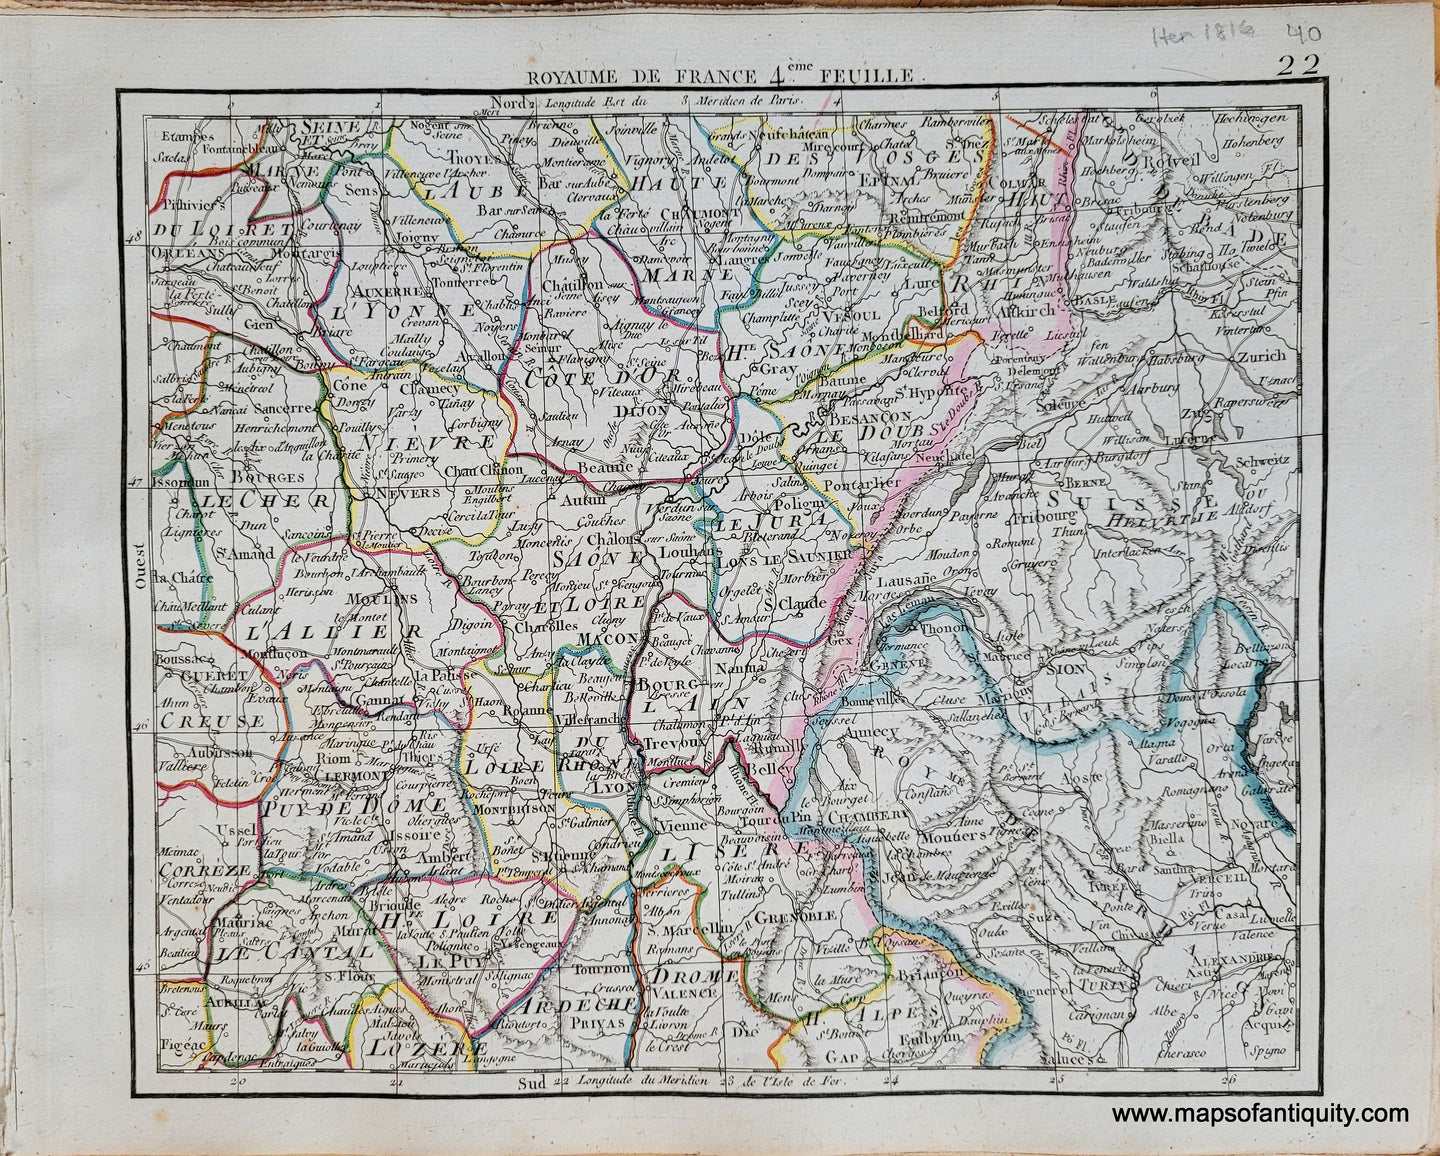 Genuine-Antique-Map-France-in-6-sheets-Sheet-4-Royaume-de-France-4eme-Feuille-France-1816-Herisson-Maps-Of-Antiquity-1800s-19th-century